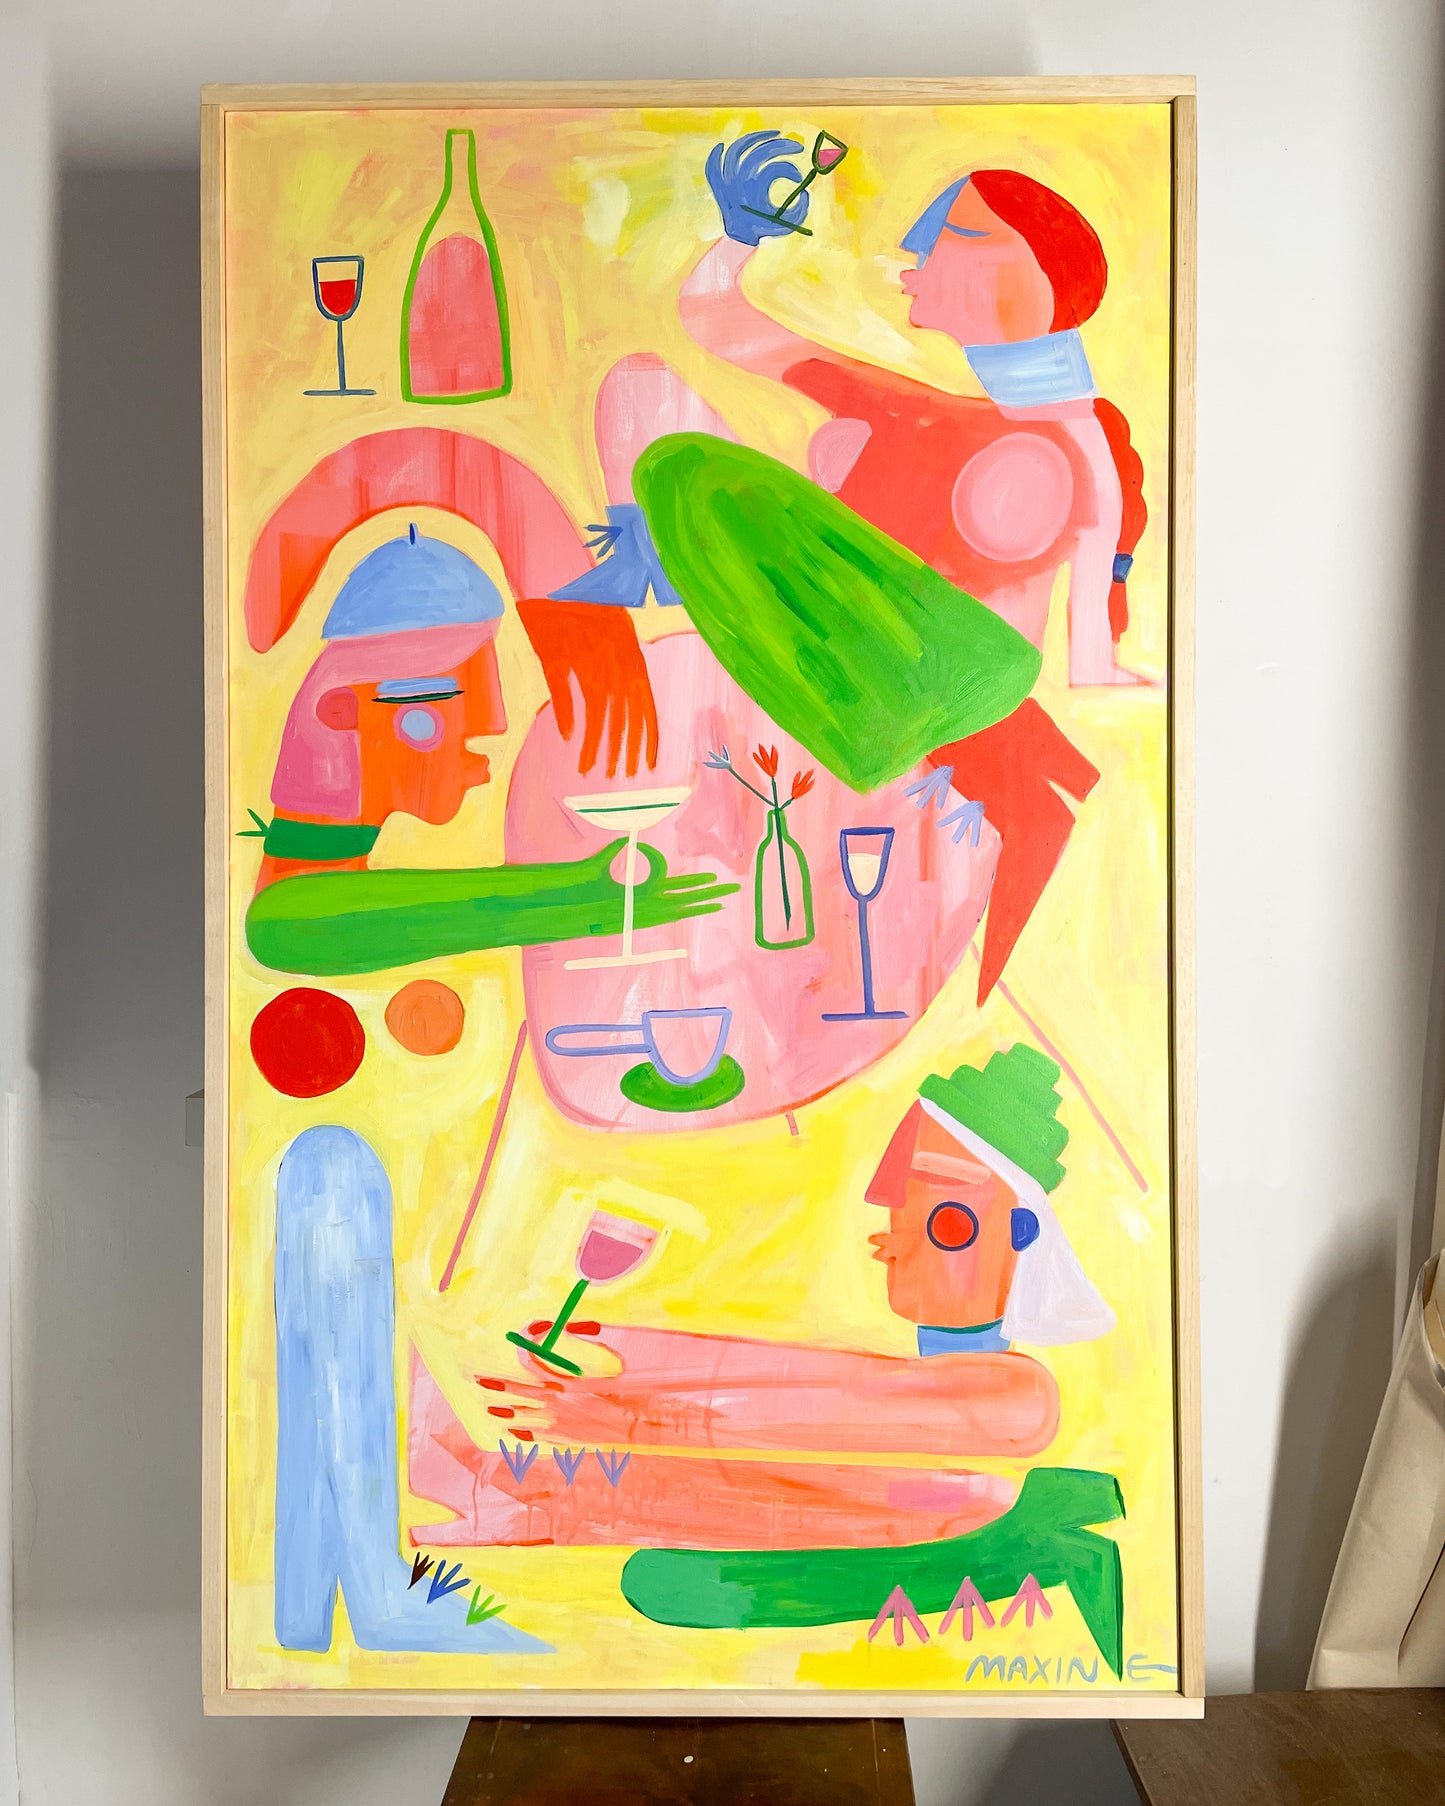 Yellow, green, pink, and blue abstract artwork pictured on the wall